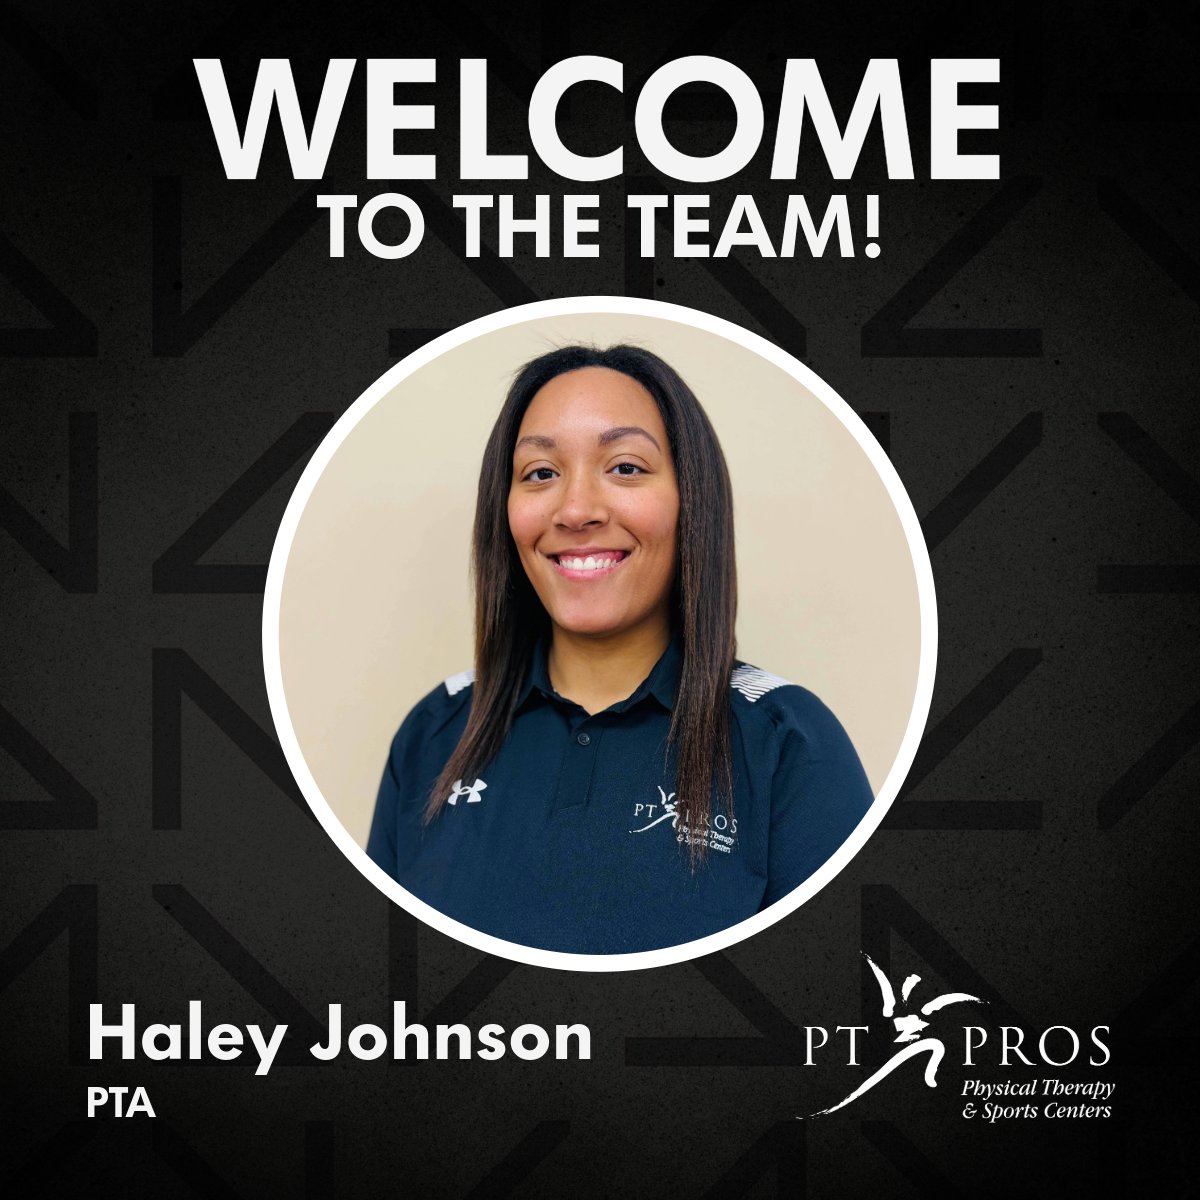 Welcome Haley Johnson to the PT Pros Harlan team! Haley graduated the @KctcsSoutheast PTA program in 2020.

“I am excited to be a part of the PT Pros Harlan team & look forward to serving this community & providing the best care possible...”

#GetMoving #YourTeamIsHere #HarlanKY